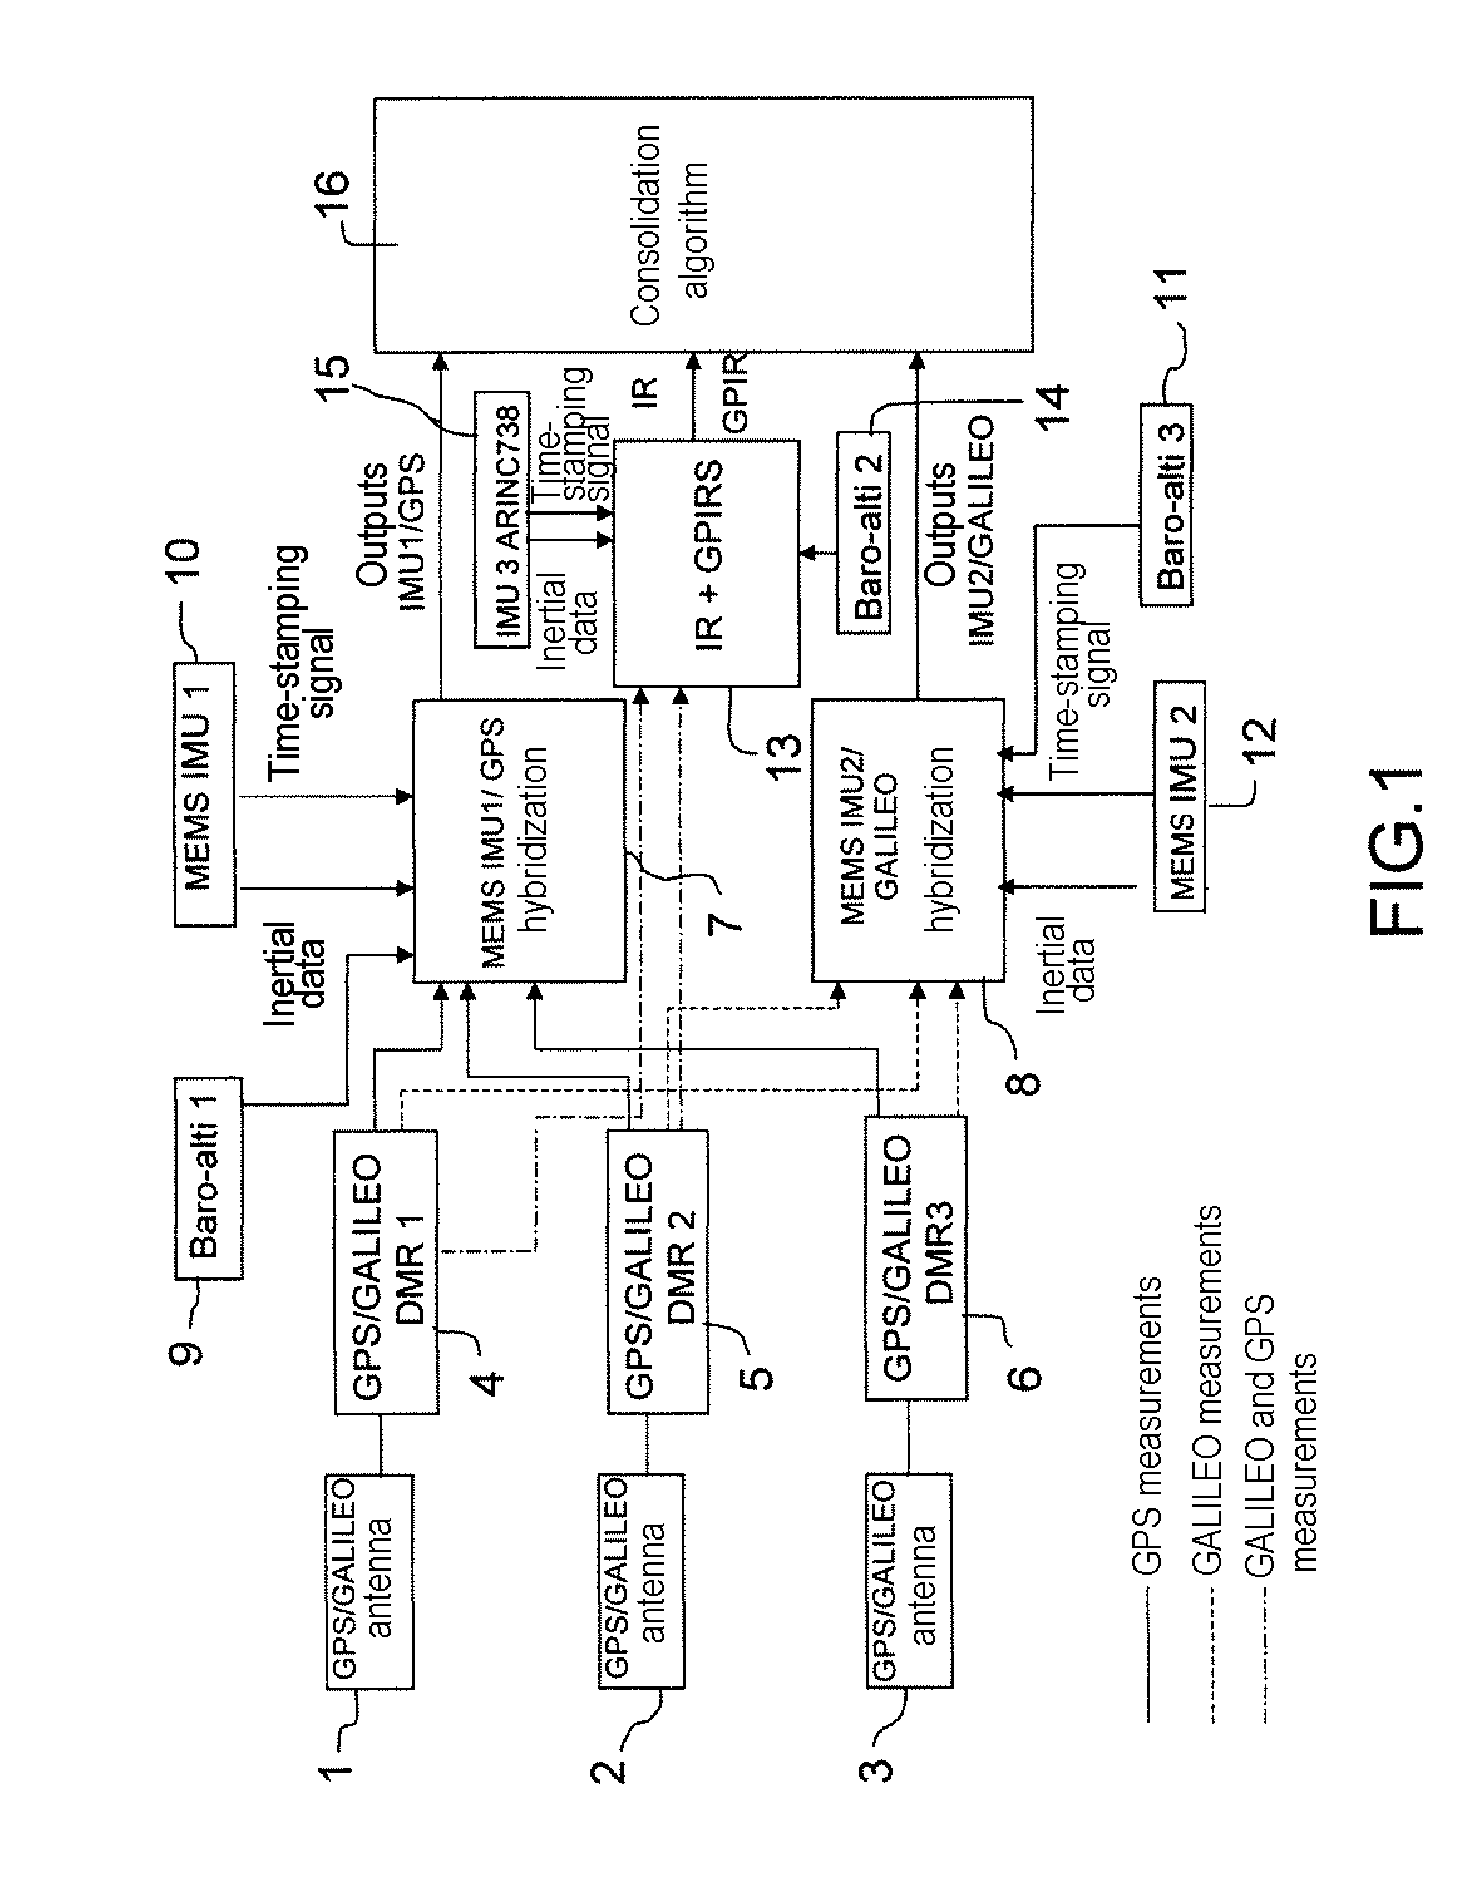 Air navigation device with inertial sensor units, radio navigation receivers, and air navigation technique using such elements